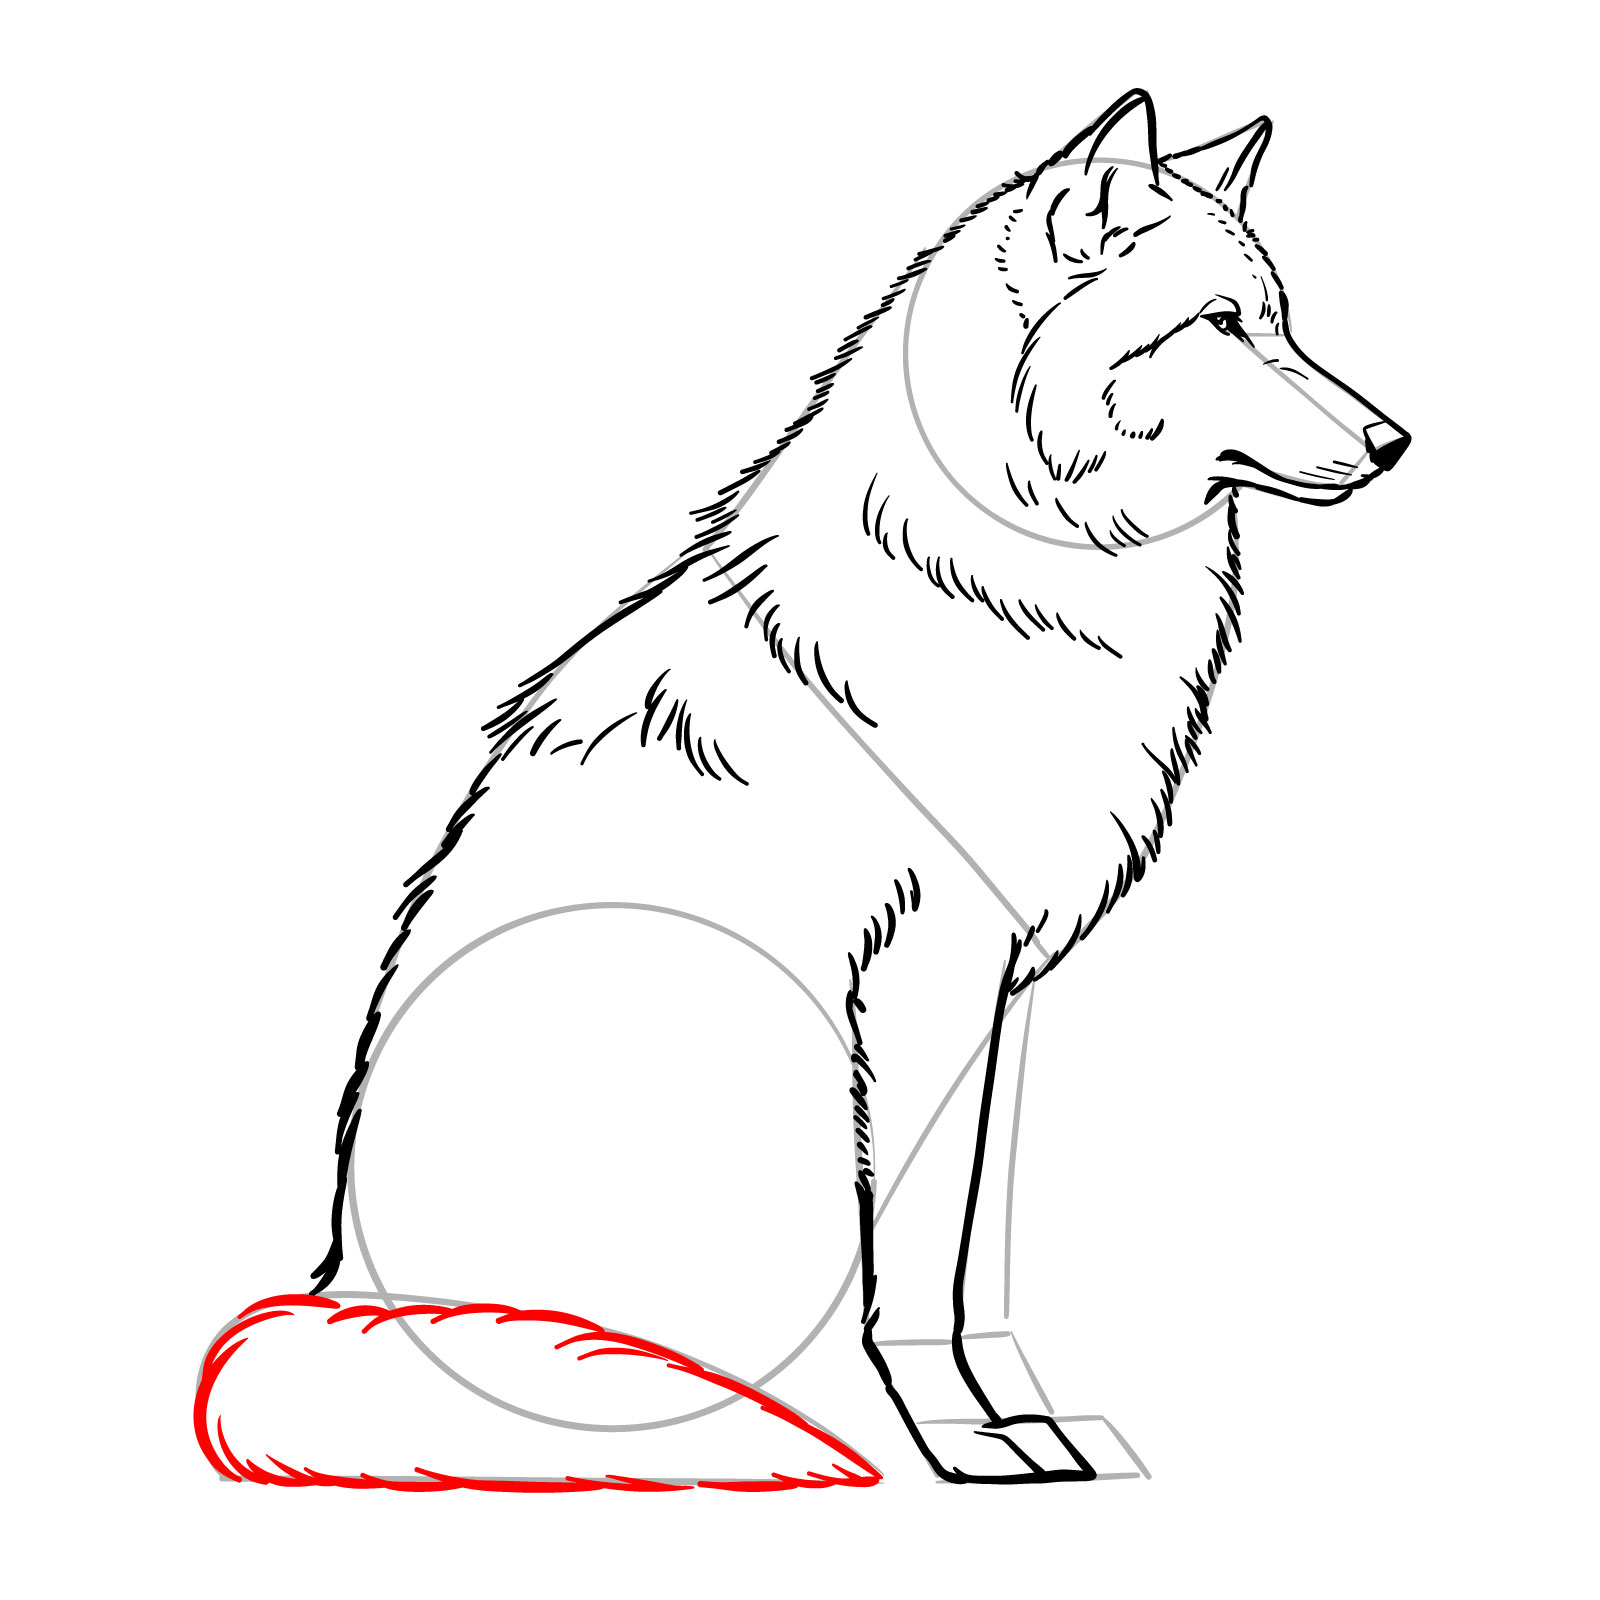 Adding a bushy tail in a sitting wolf drawing instruction - step 12